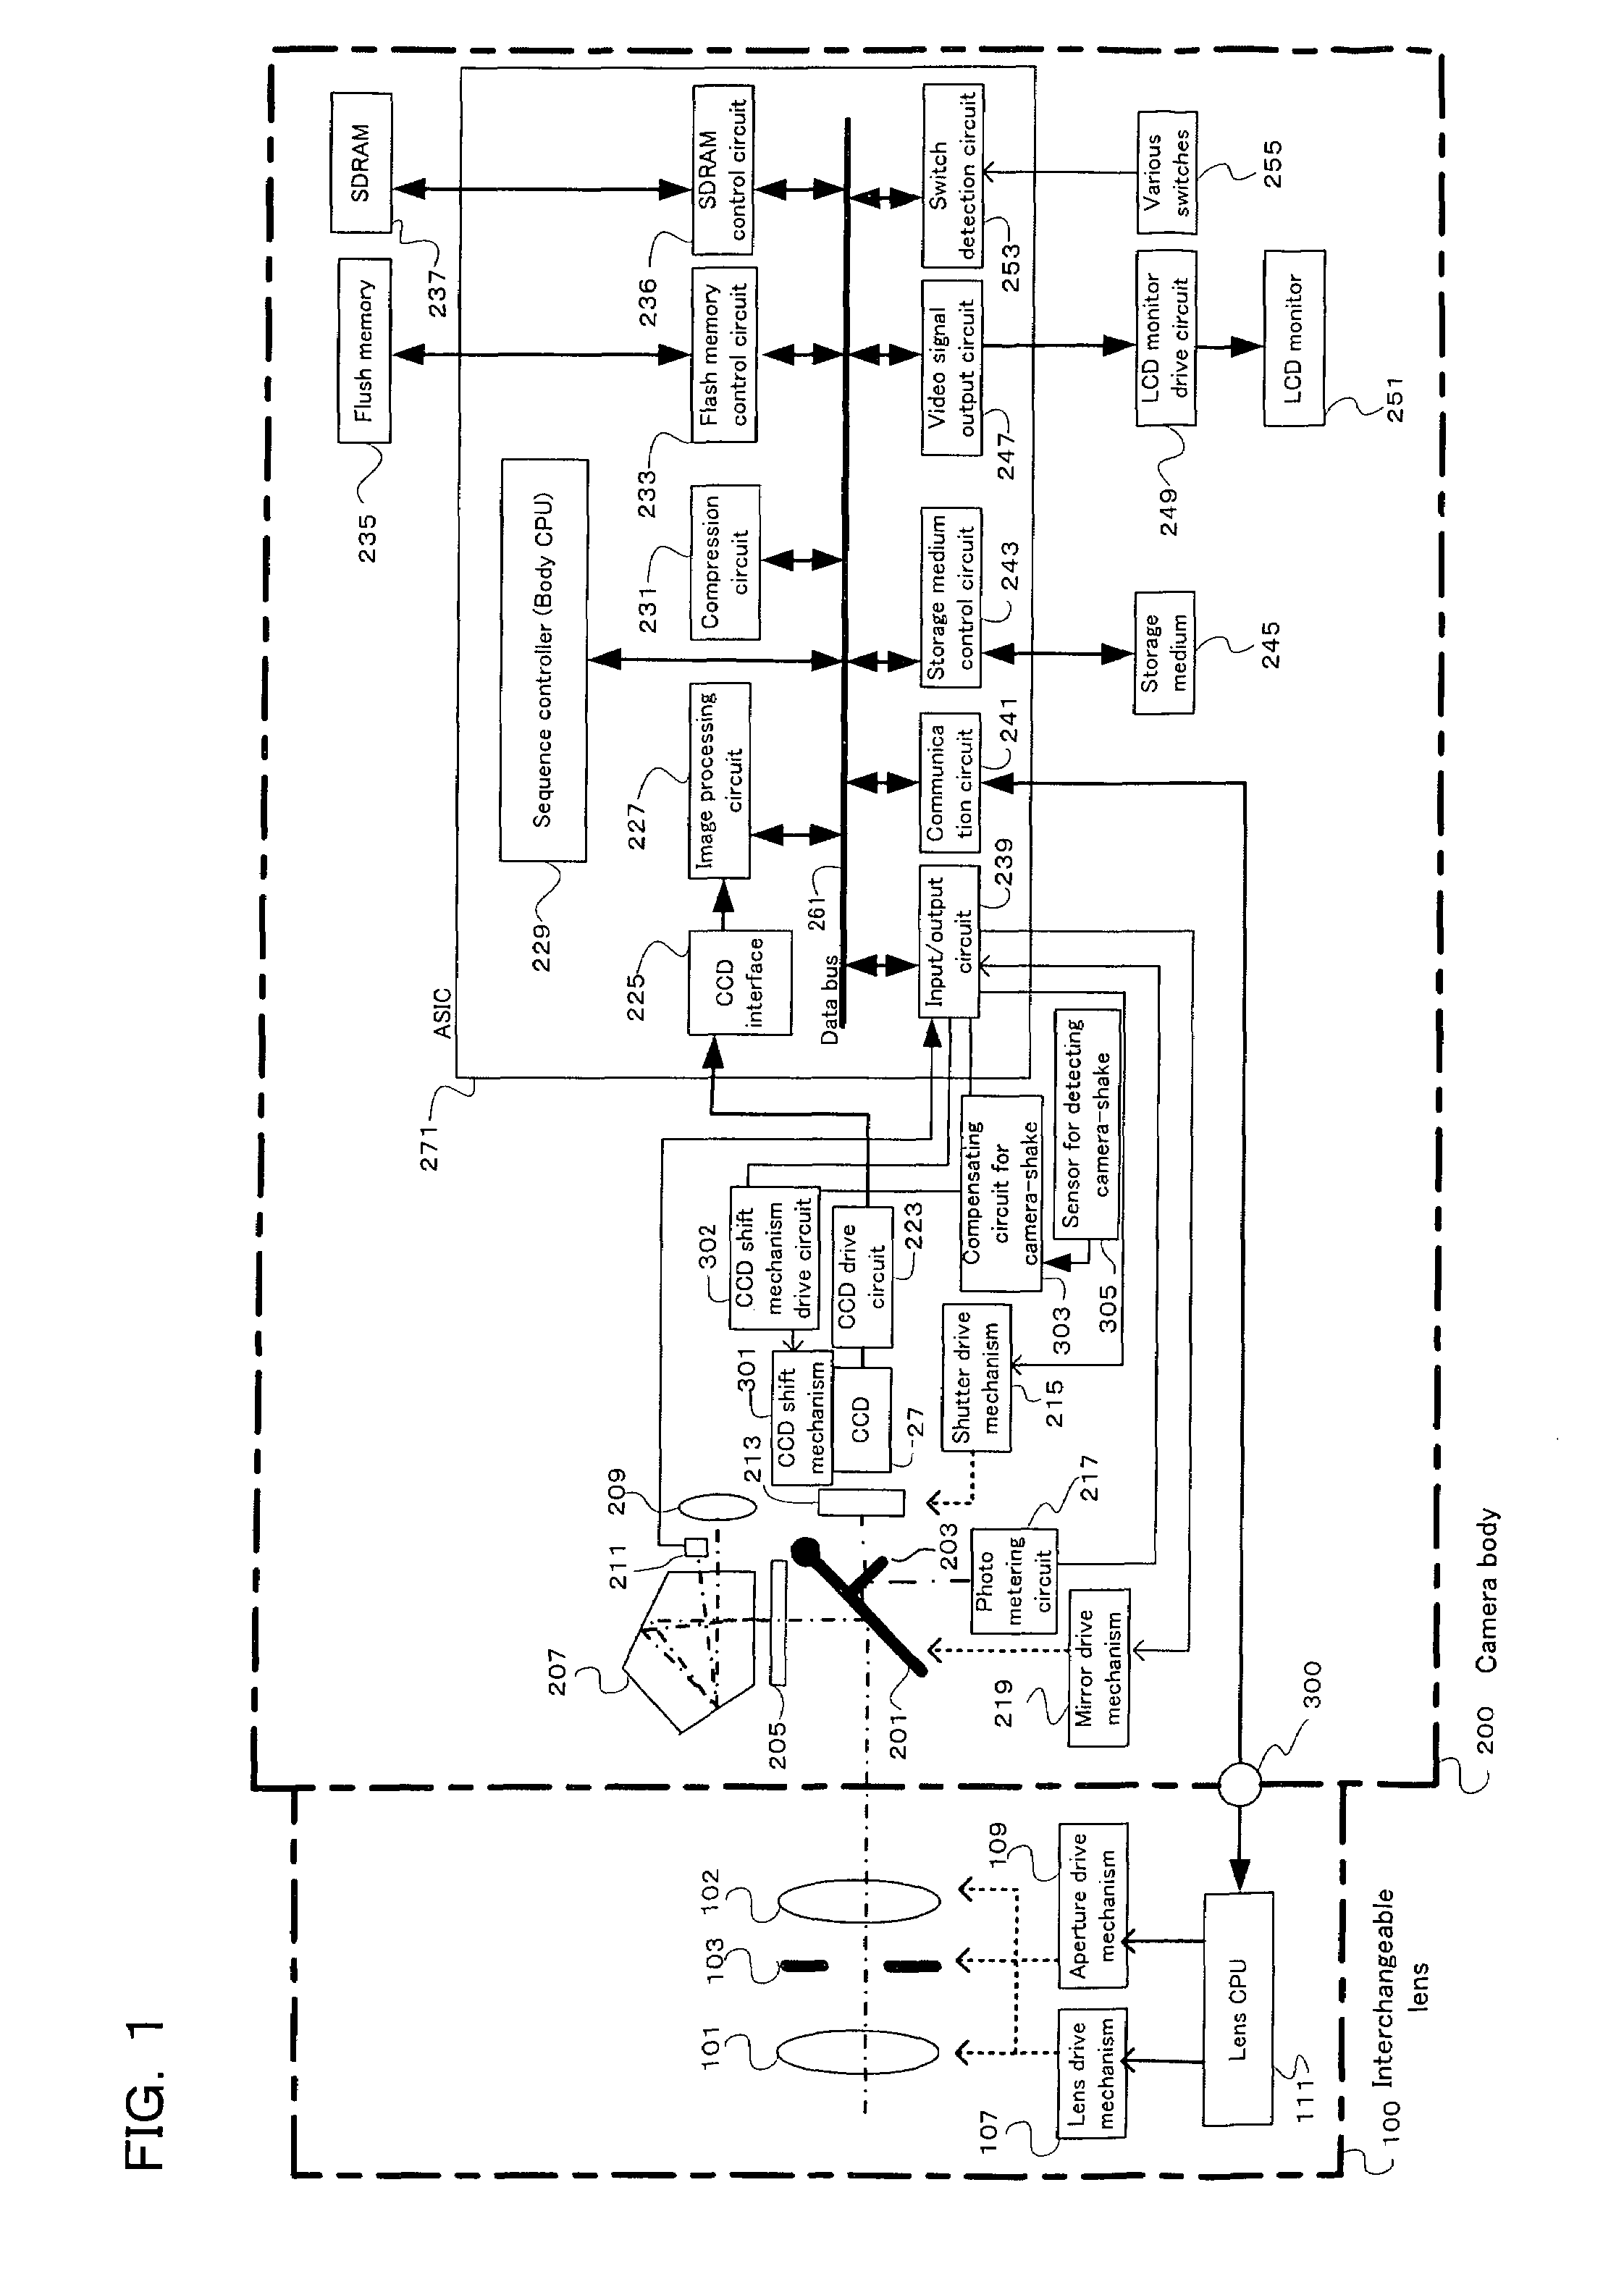 Image pickup apparatus controlling shake sensing and/or shake compensation during dust removal